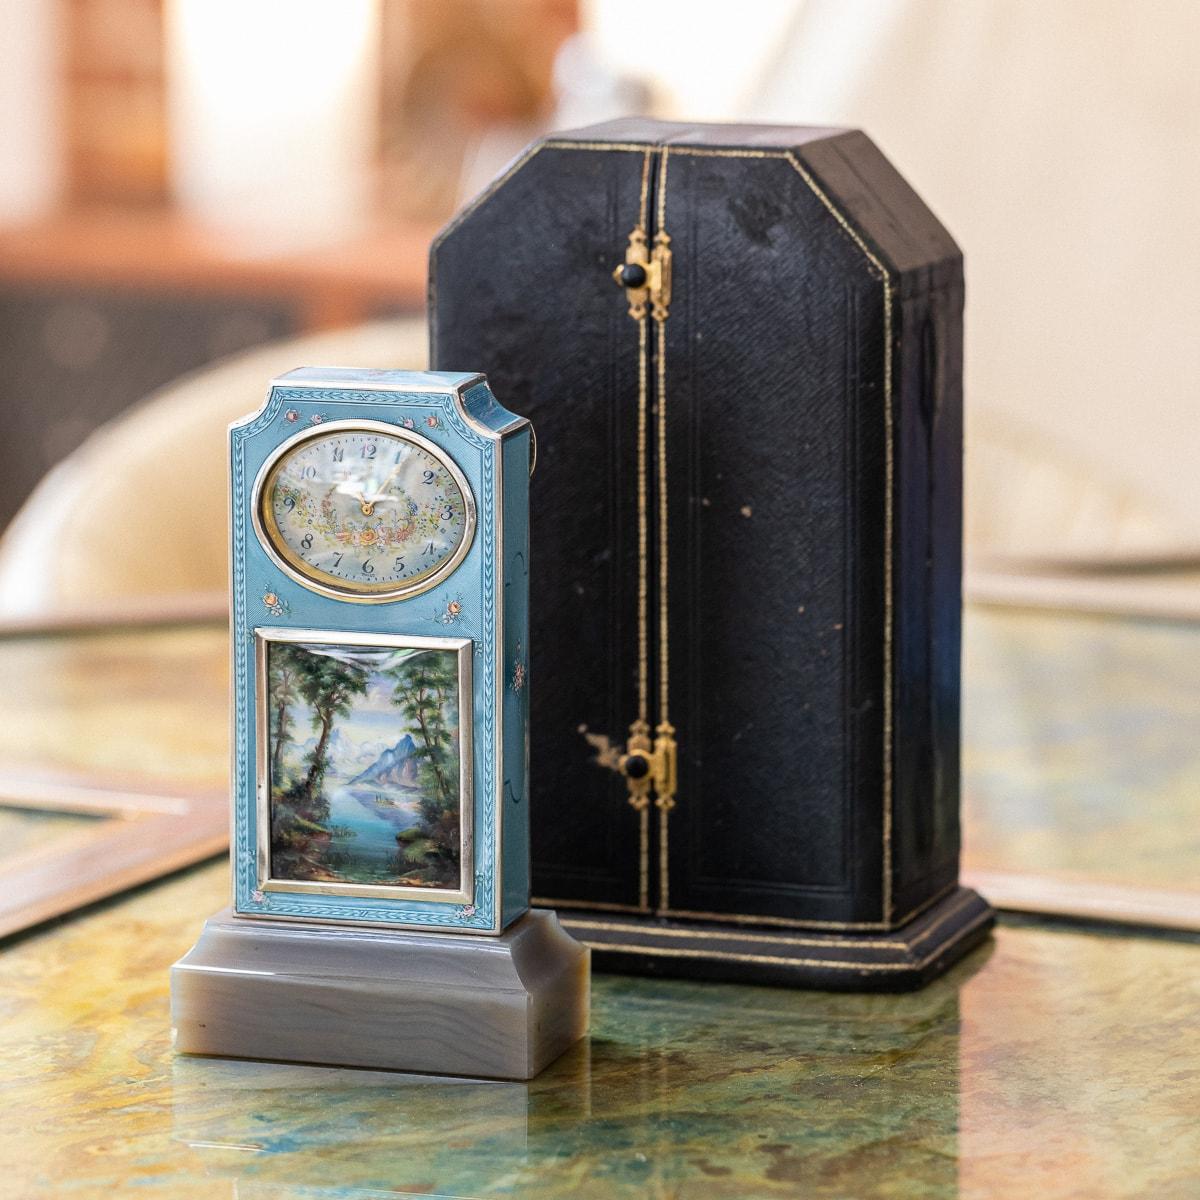 Antique early 20th century swiss solid silver and guilloché enamel travel clock or boudoir clock, in neoclassical taste, of upright rectangular form with inverted arched top and standing on a raised grey agate plinth, applied with a translucent